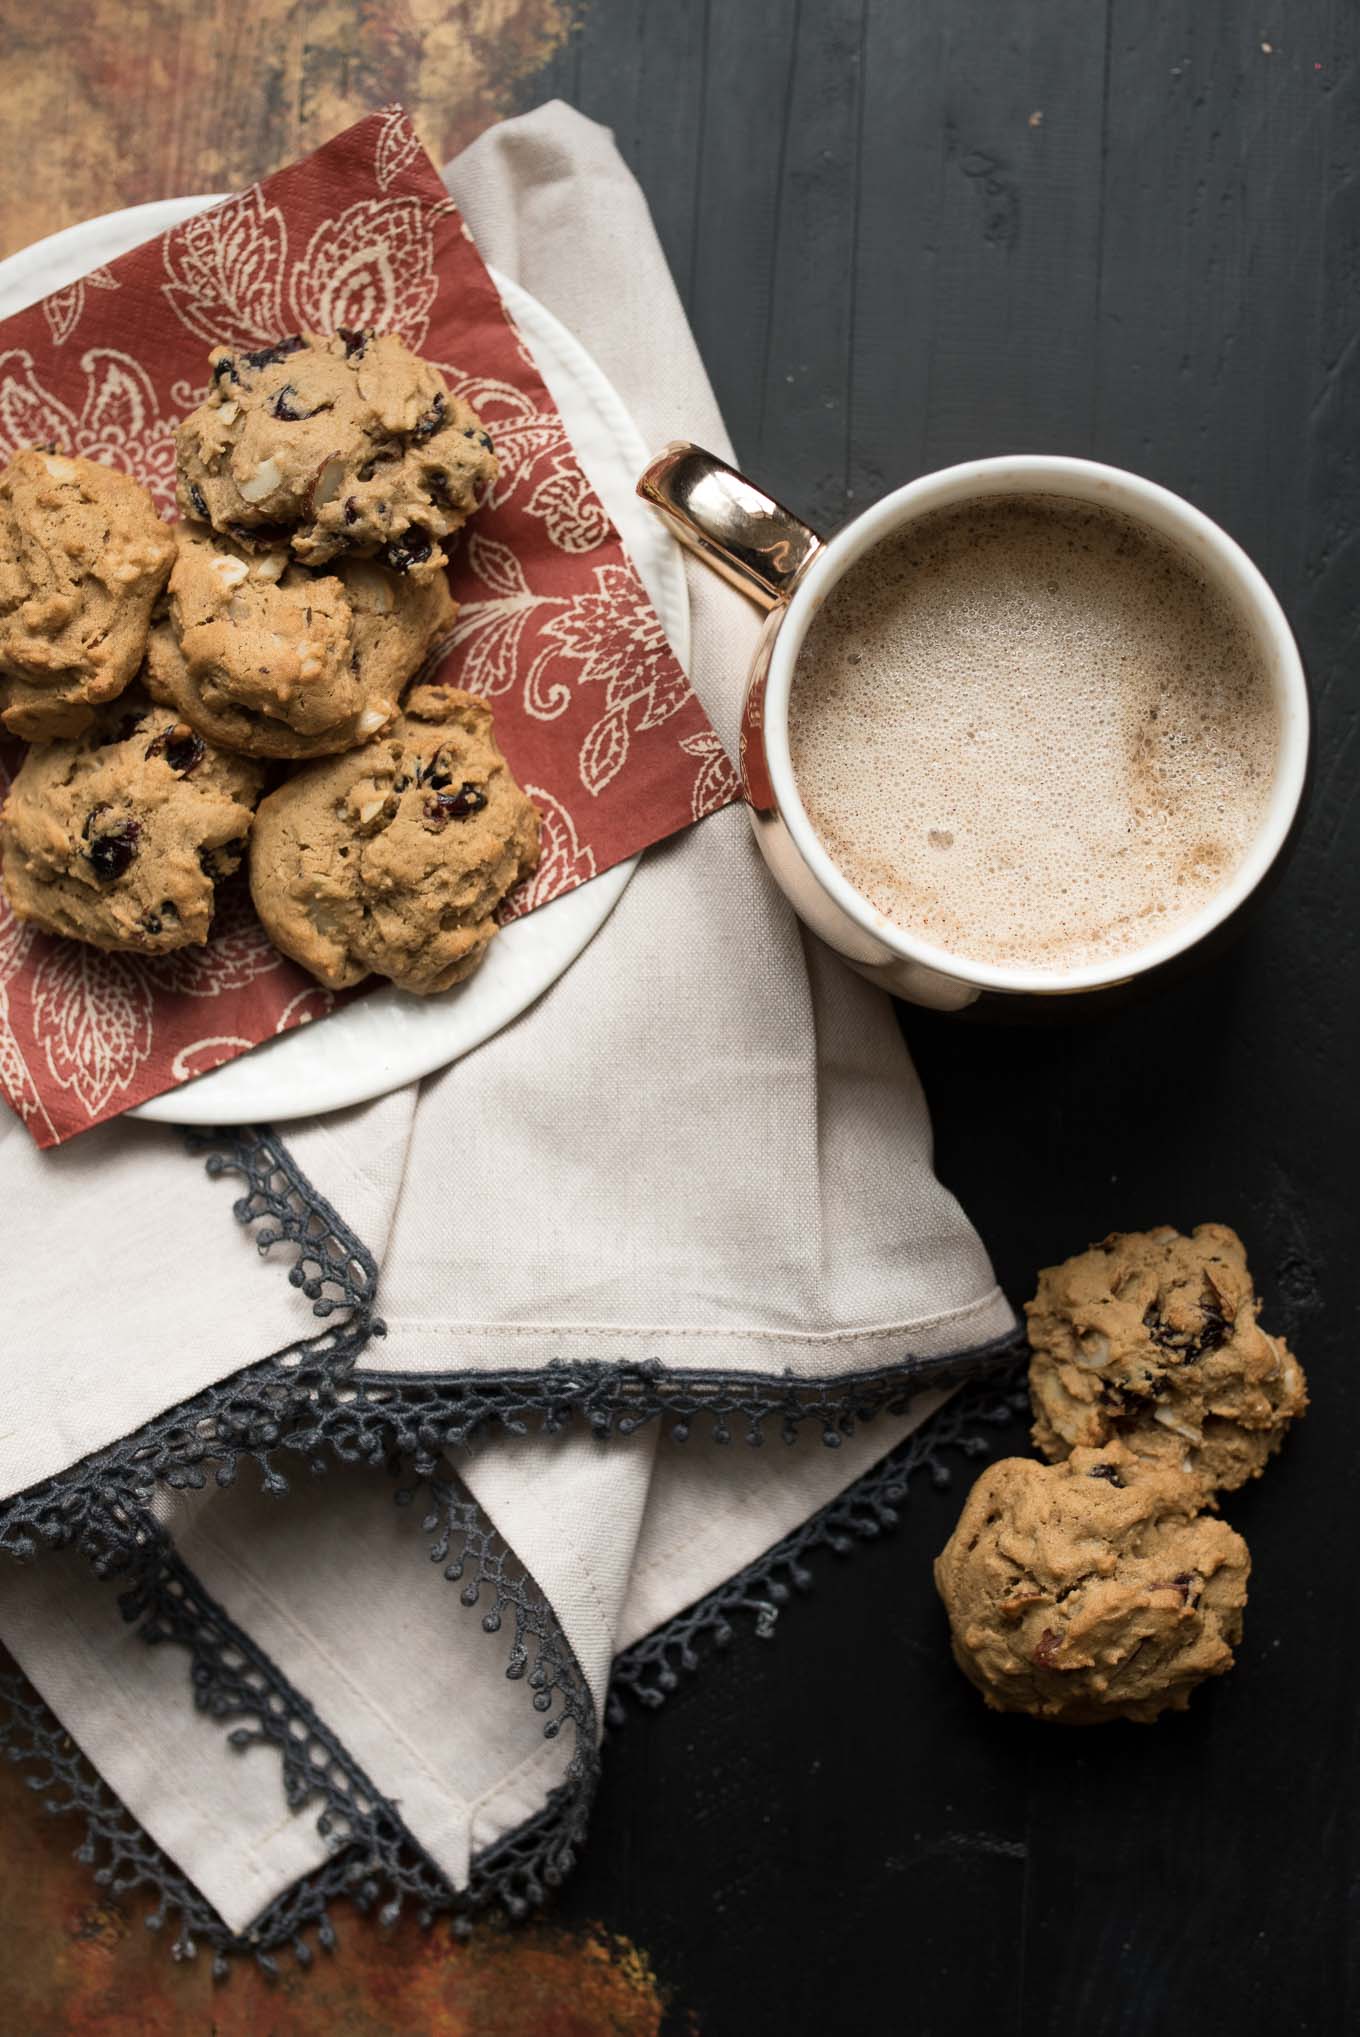 http://www.nutritiouseats.com/wp-content/uploads/2016/12/Cranberry-Almond-Spice-Cookies-6.jpg